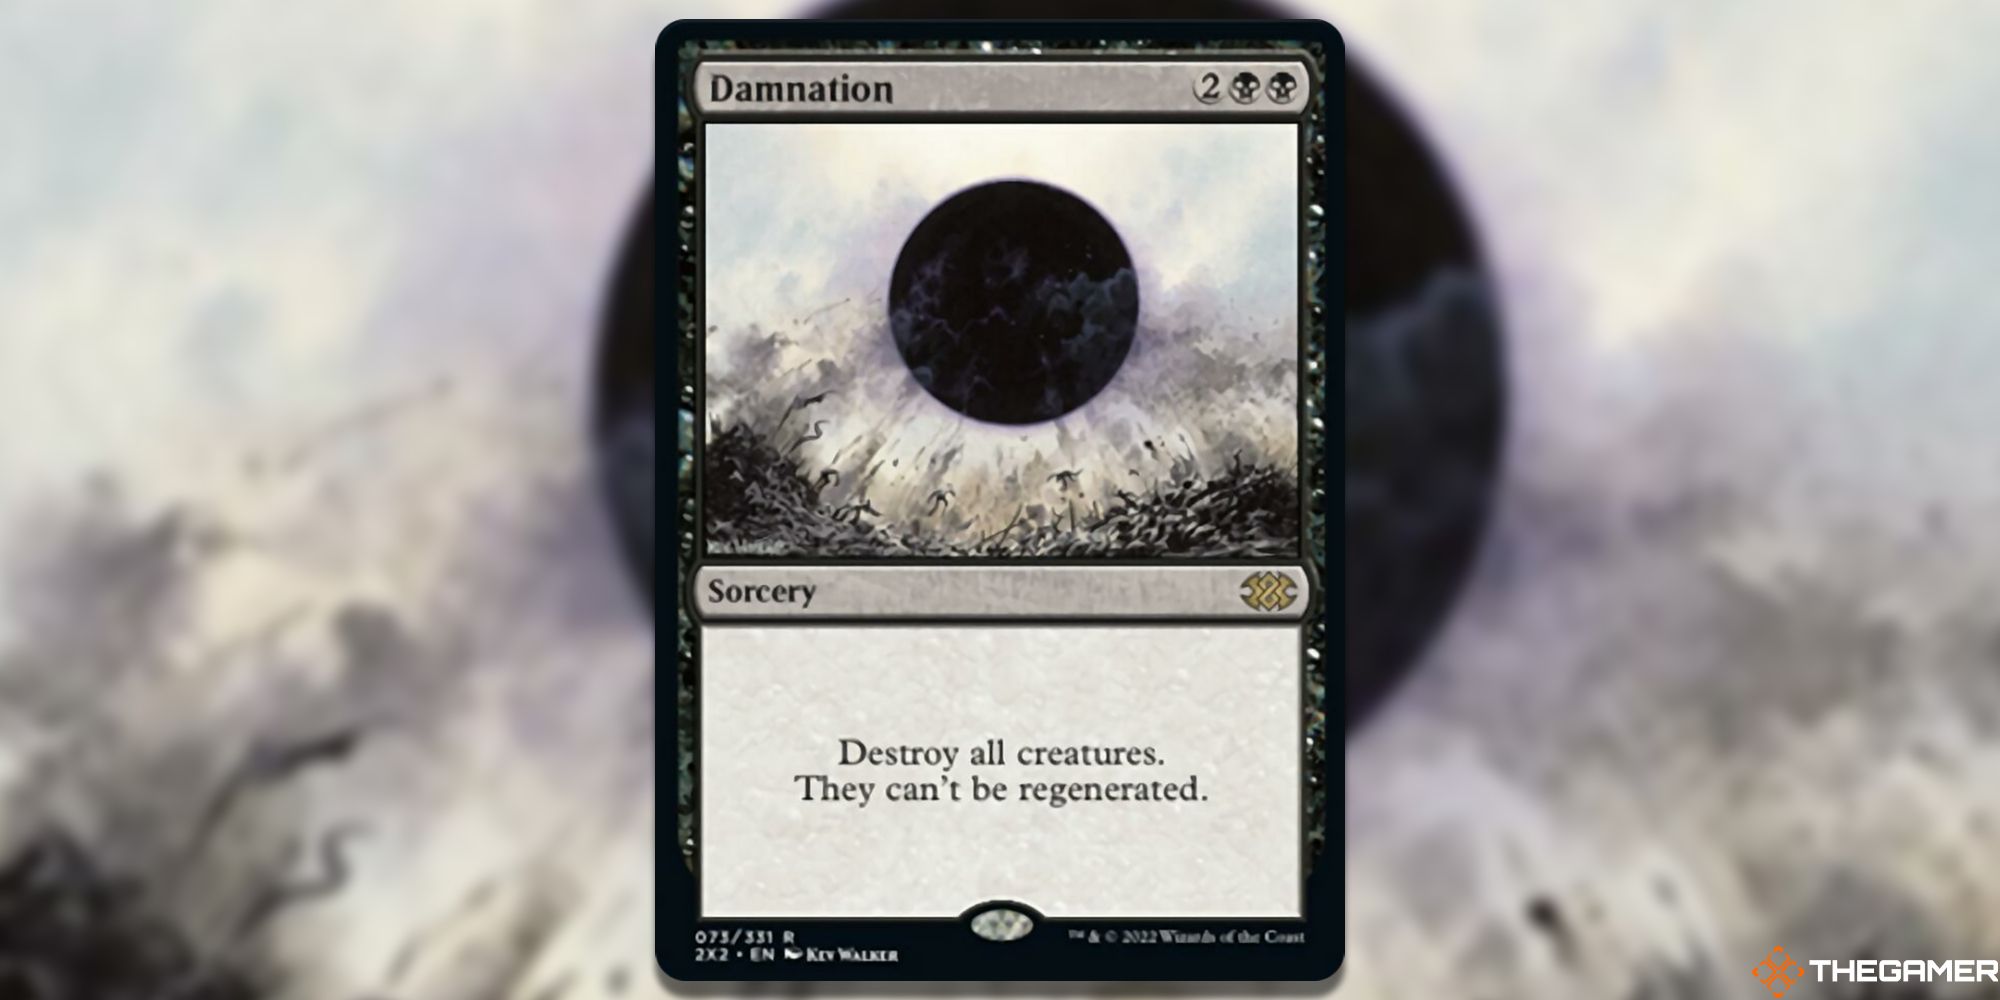 Image of the Damnation card in Magic: The Gathering, with art by Kev Walker